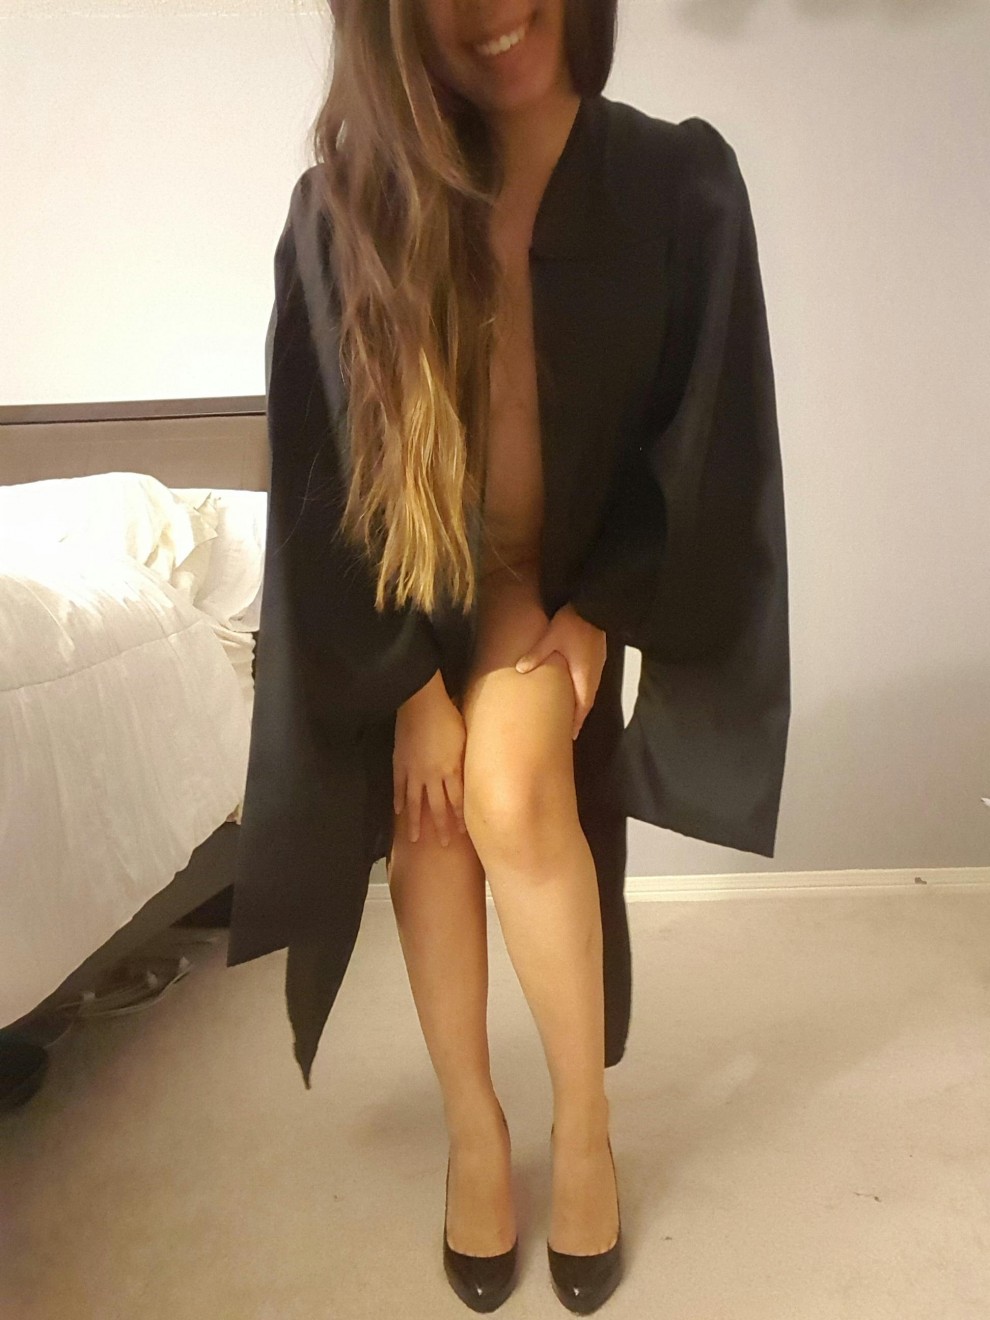 (F) Think anyone would notice what's underneath the gown?